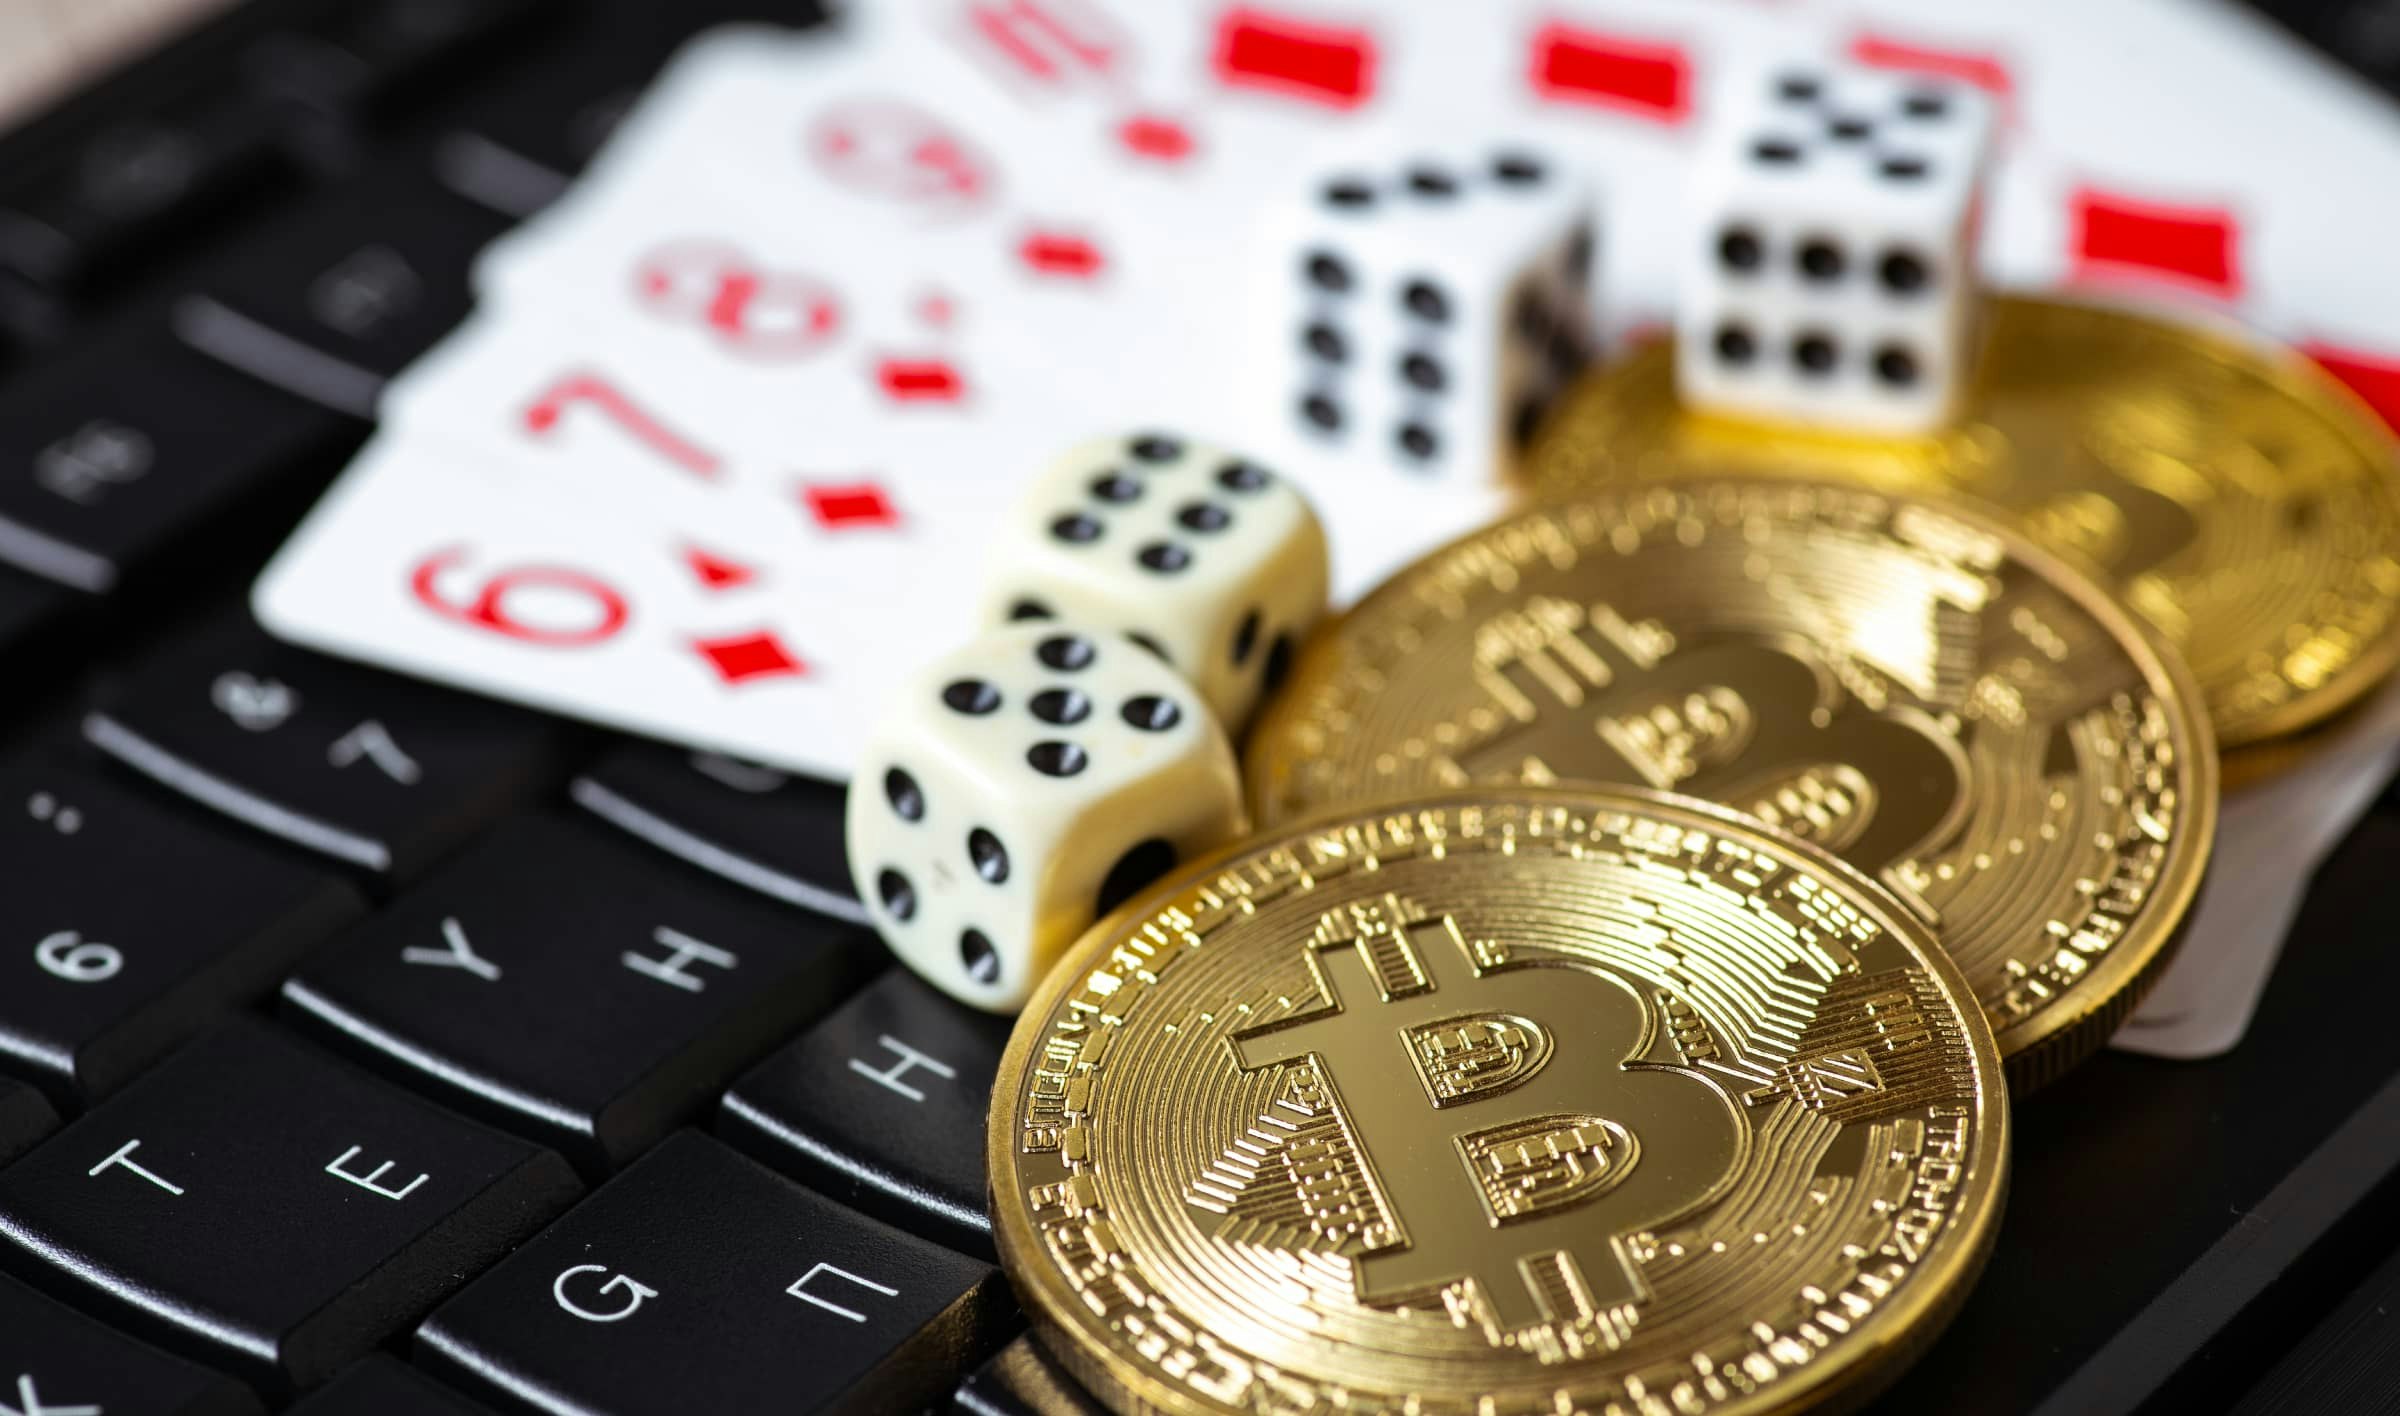 The Top 5 Bitcoin casino games for Vietnamese people